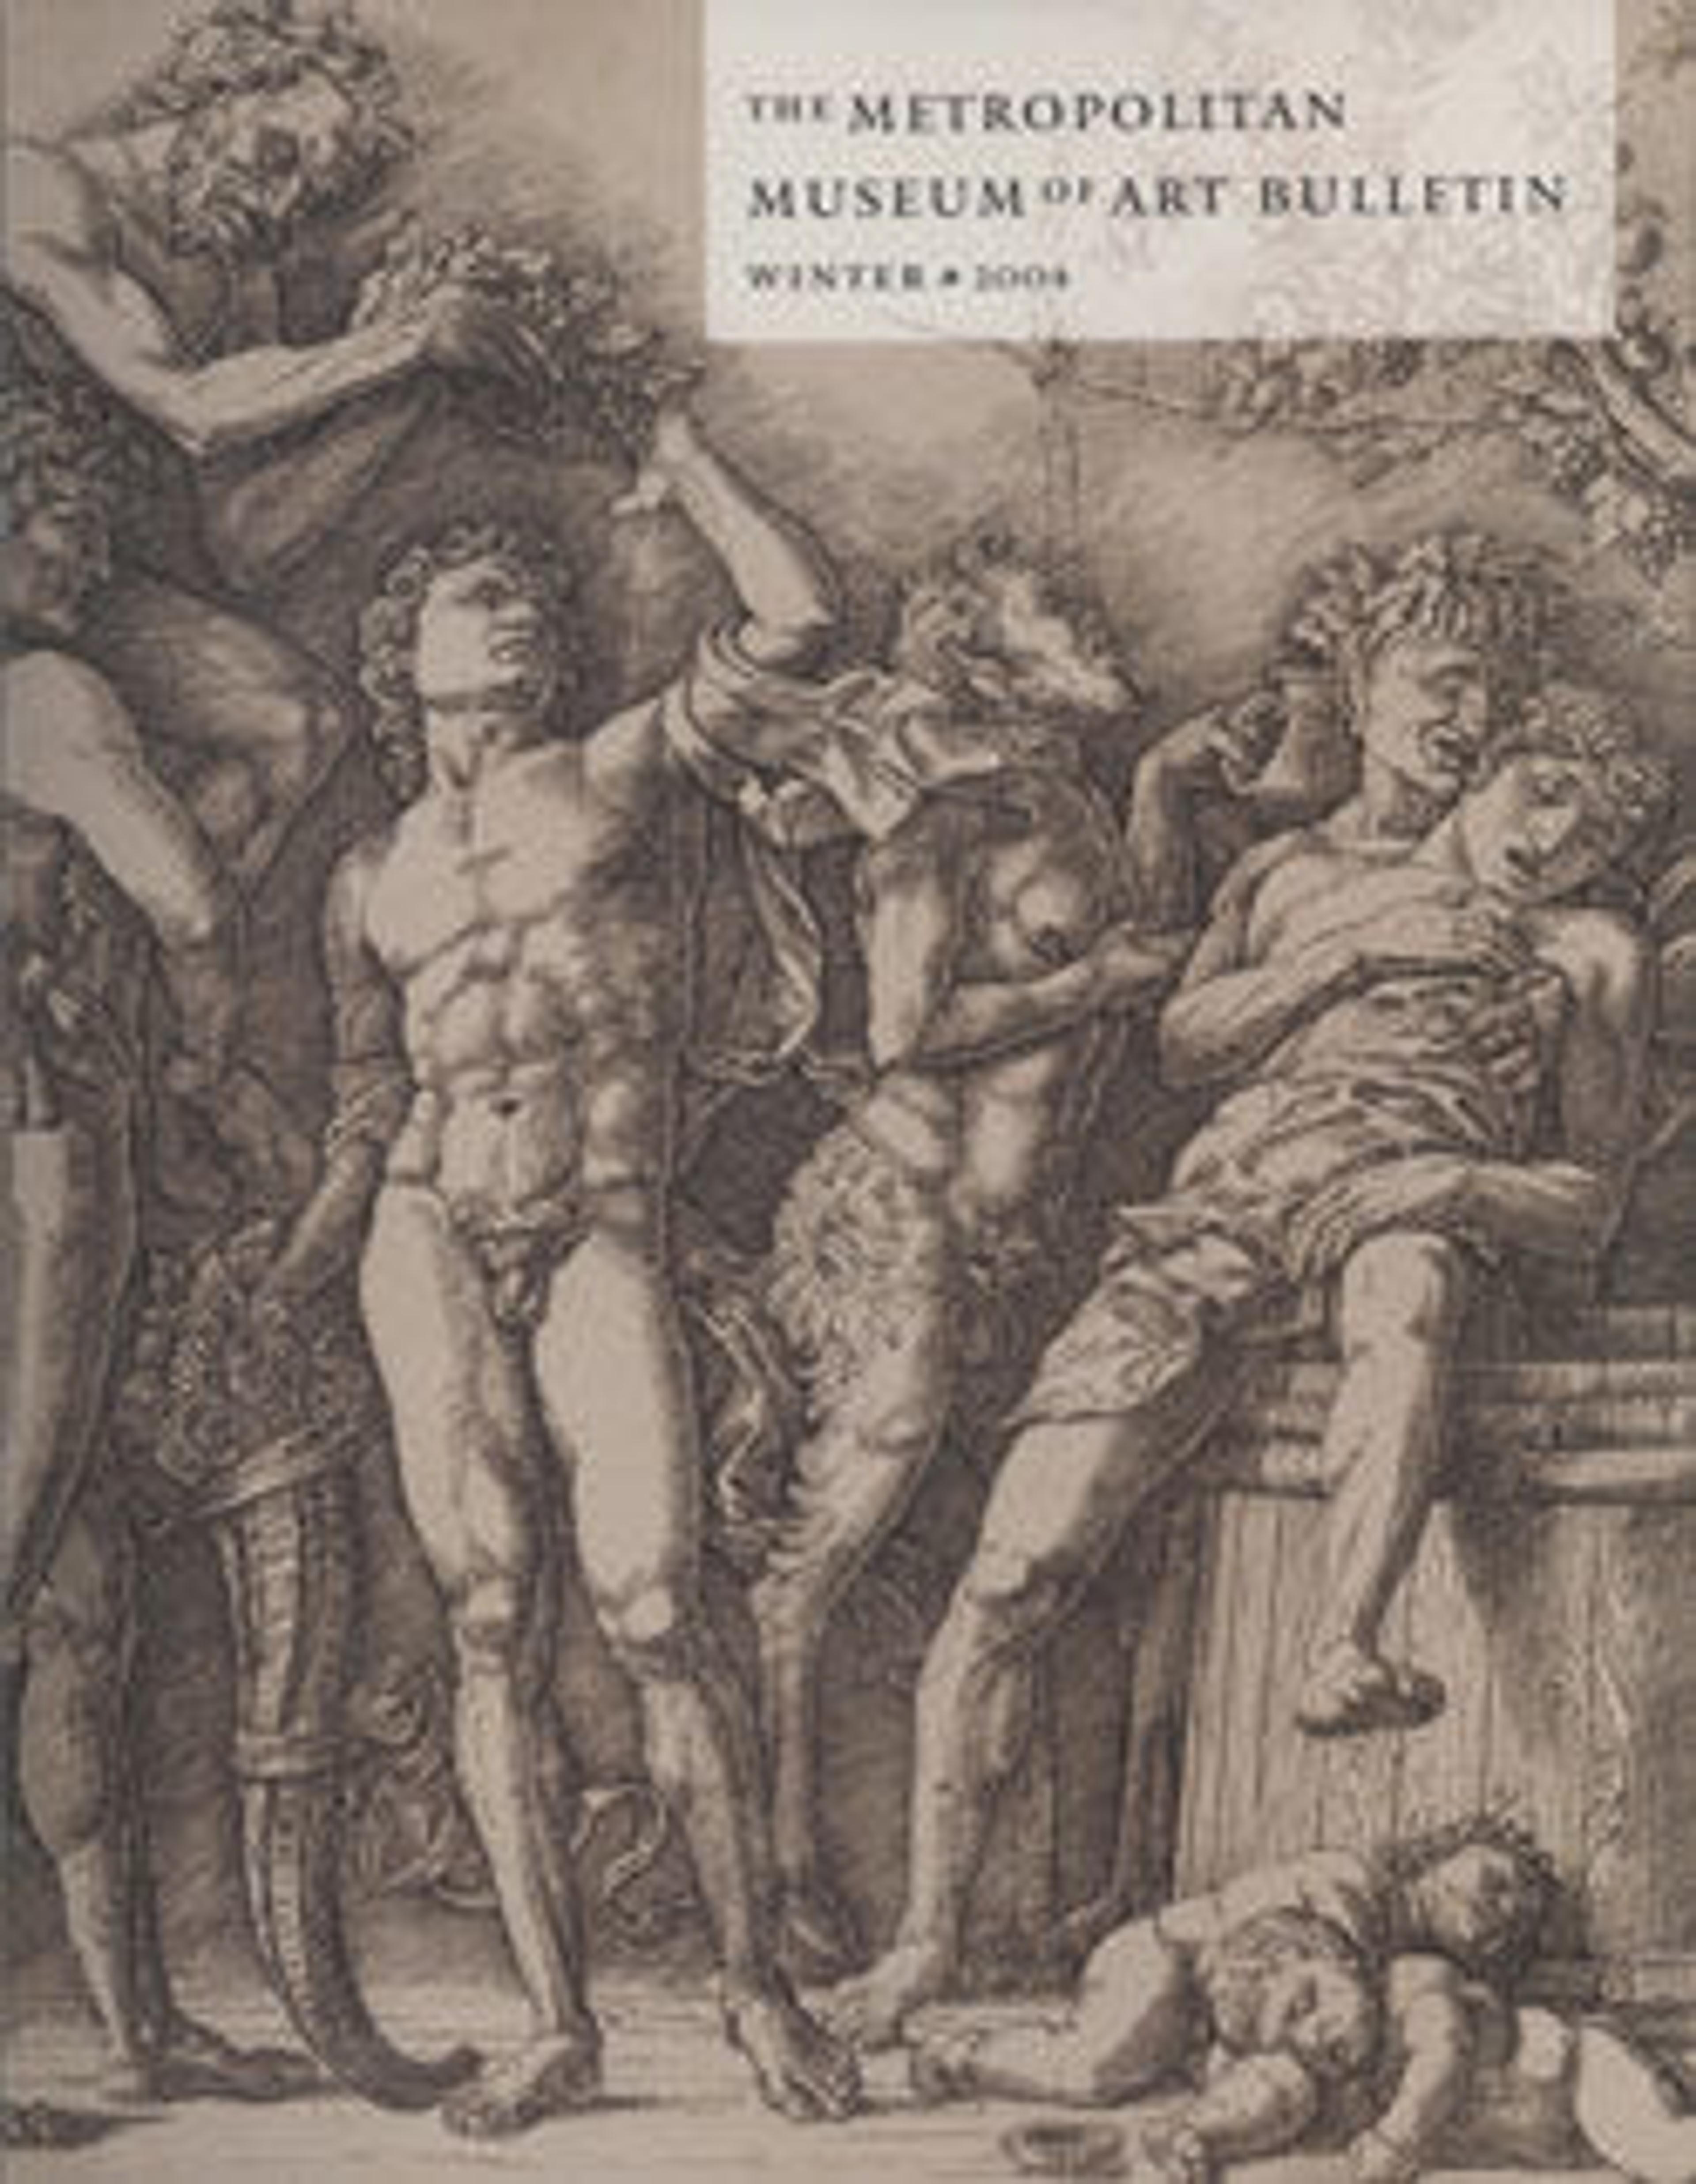 "Poets, Lovers, and Heroes in Italian Mythological Prints": The Metropolitan Museum of Art Bulletin, v. 61 no. 3 (Winter, 2004)